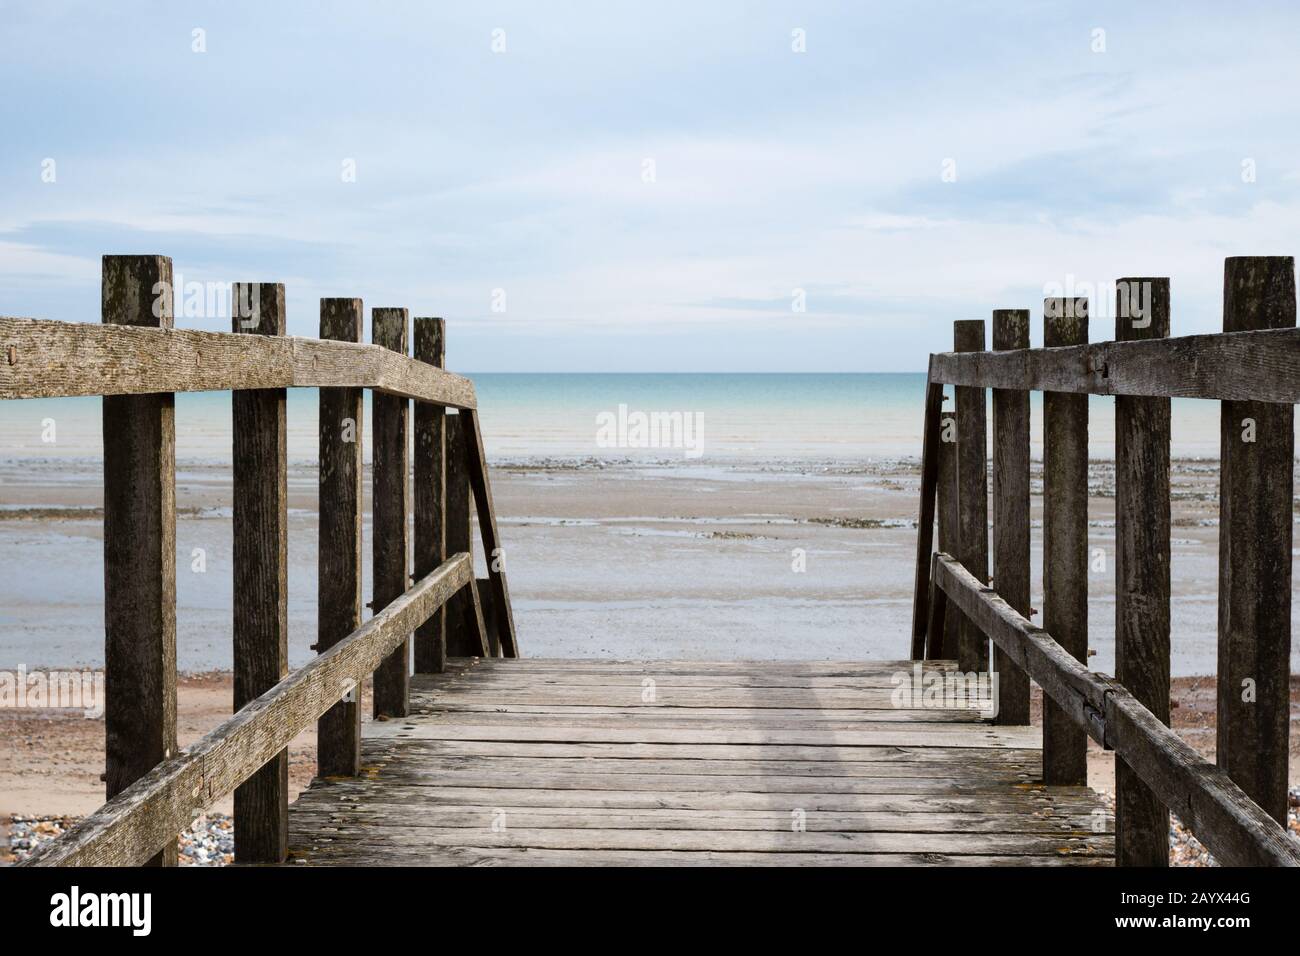 Shot taken from point of view of standing on a wooden bridge, looking out towards the horizon at the beach at low tide. Stock Photo